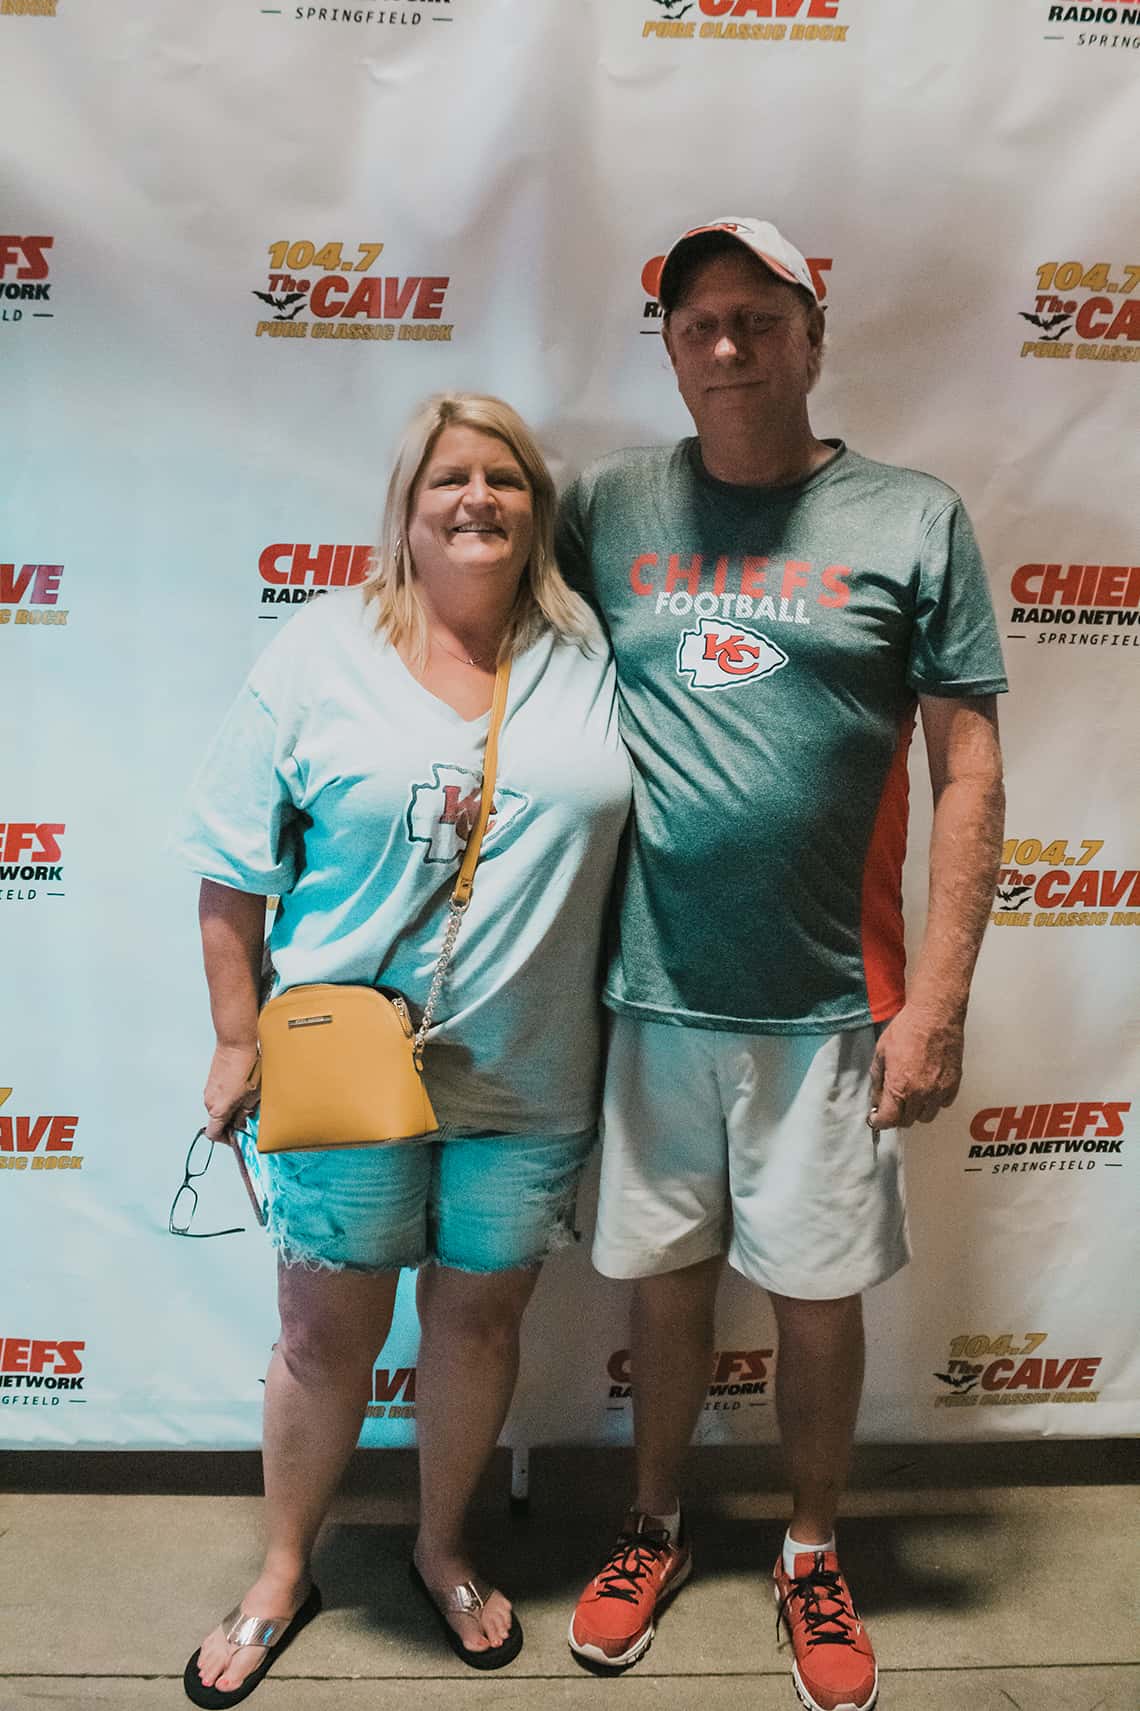 Chiefs Happy Hour with Mitch Holthus - 104.7 The Cave